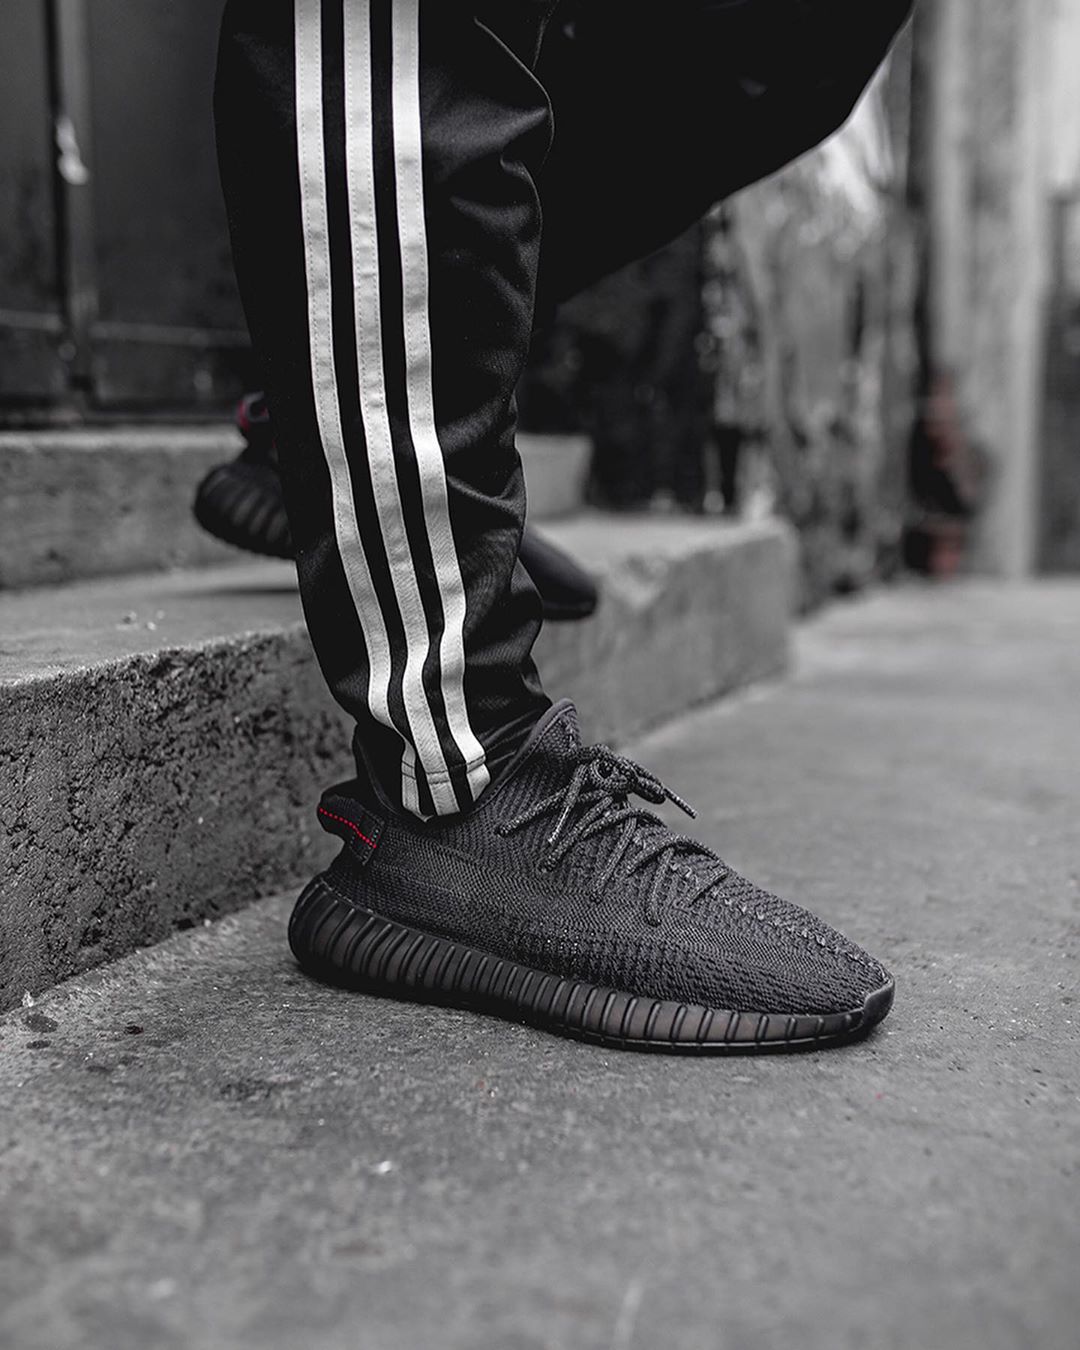 yeezy 350 v2 black outfit